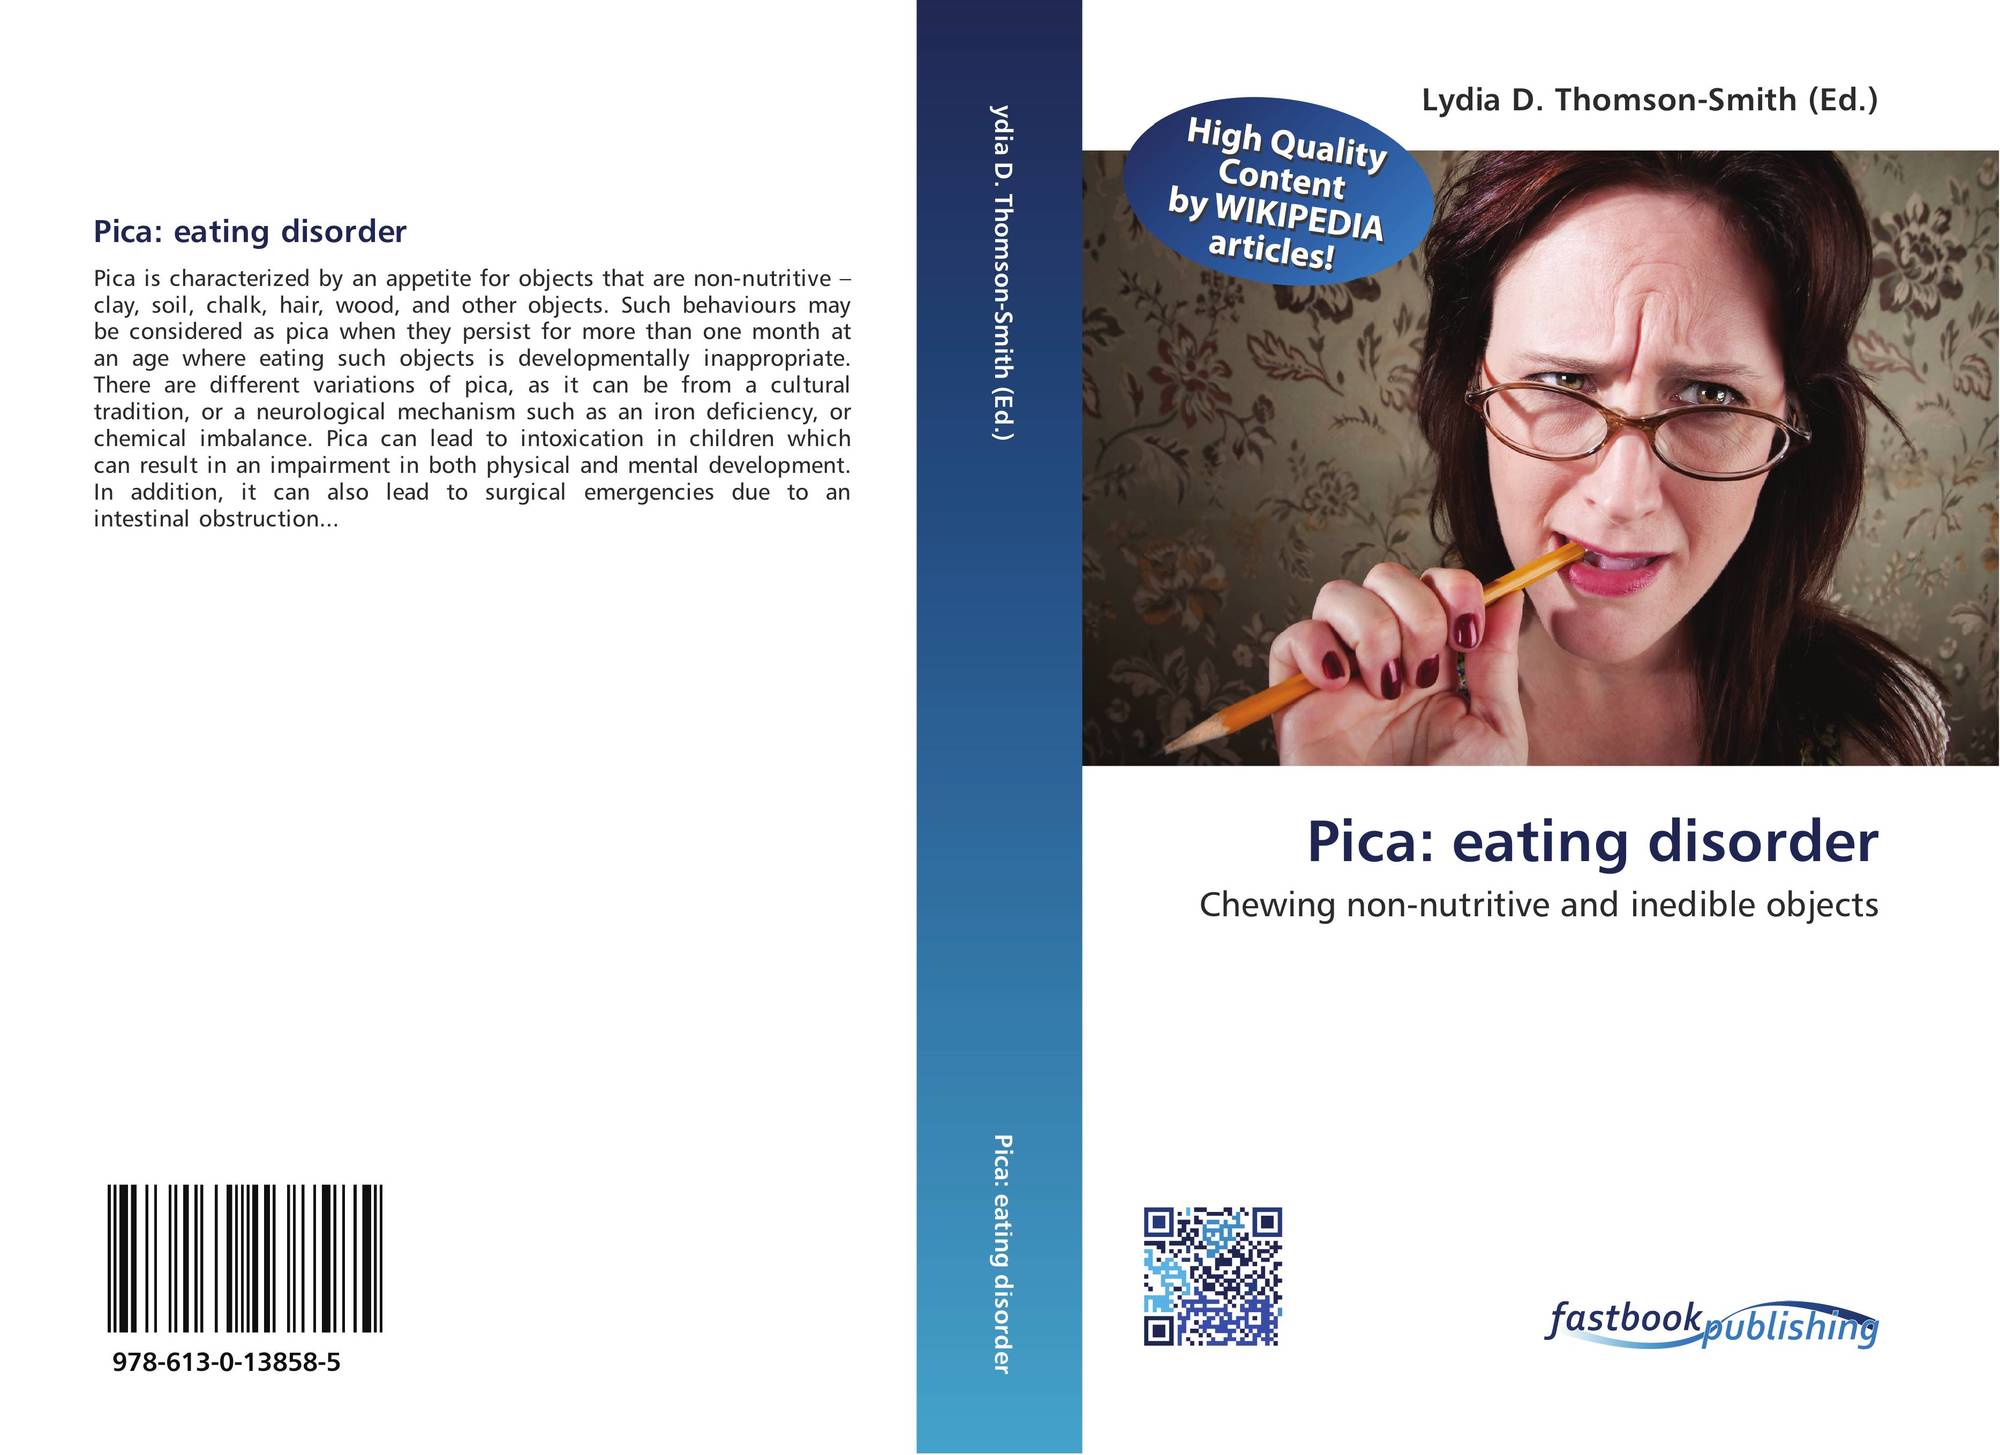 19th century case of pica eating disorder